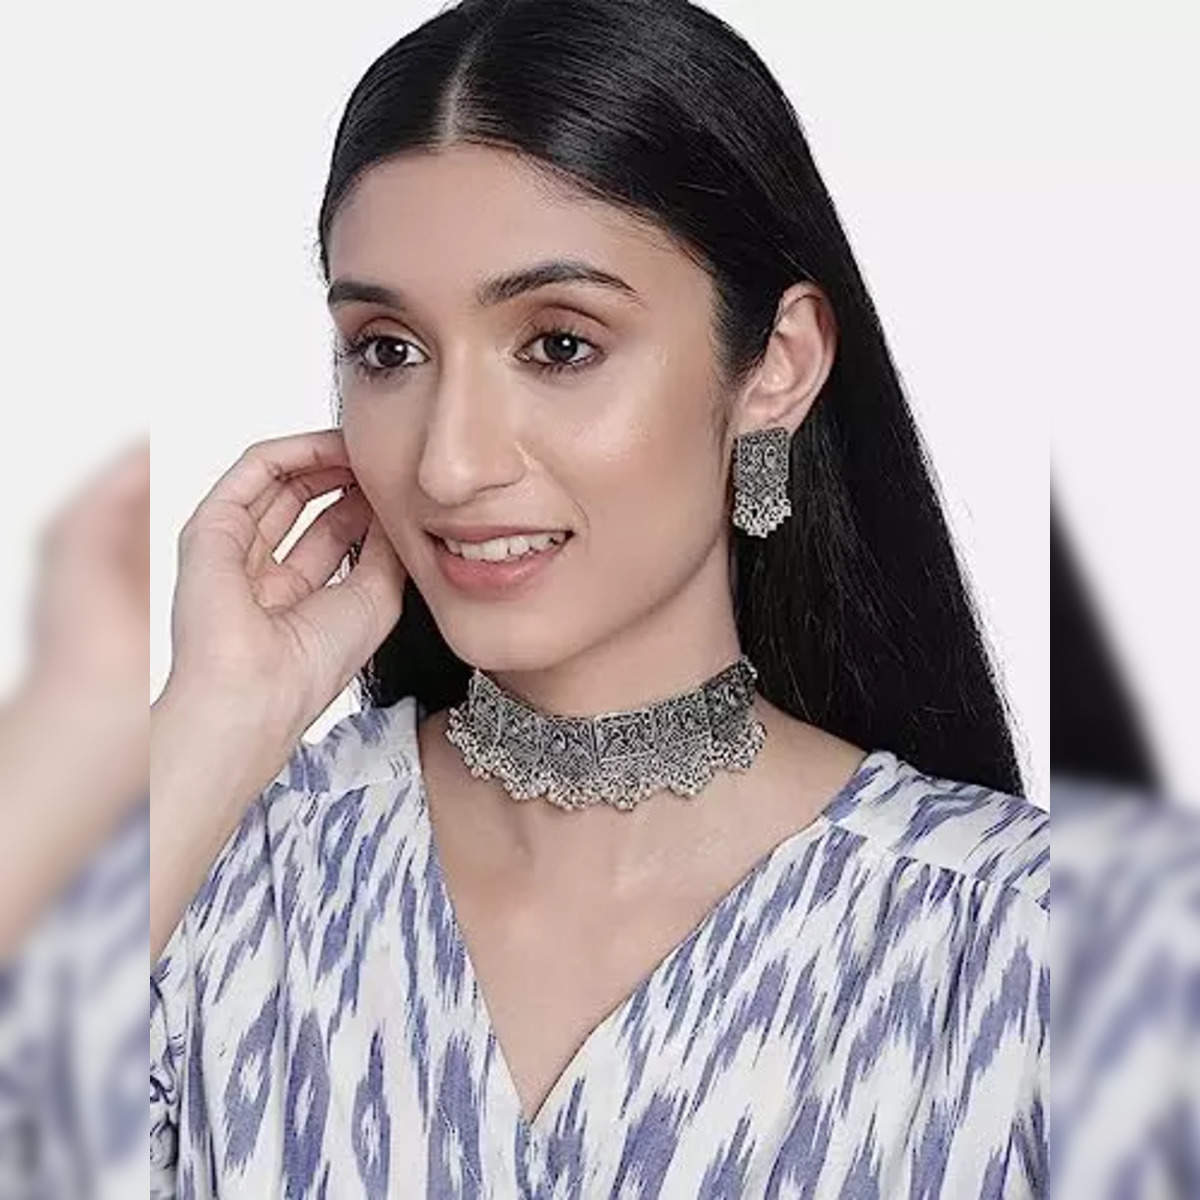 Oxidized jewellery sets: Make Your Style Unique with The Top 6 Oxidized  Jewellery Sets for Women in India - The Economic Times